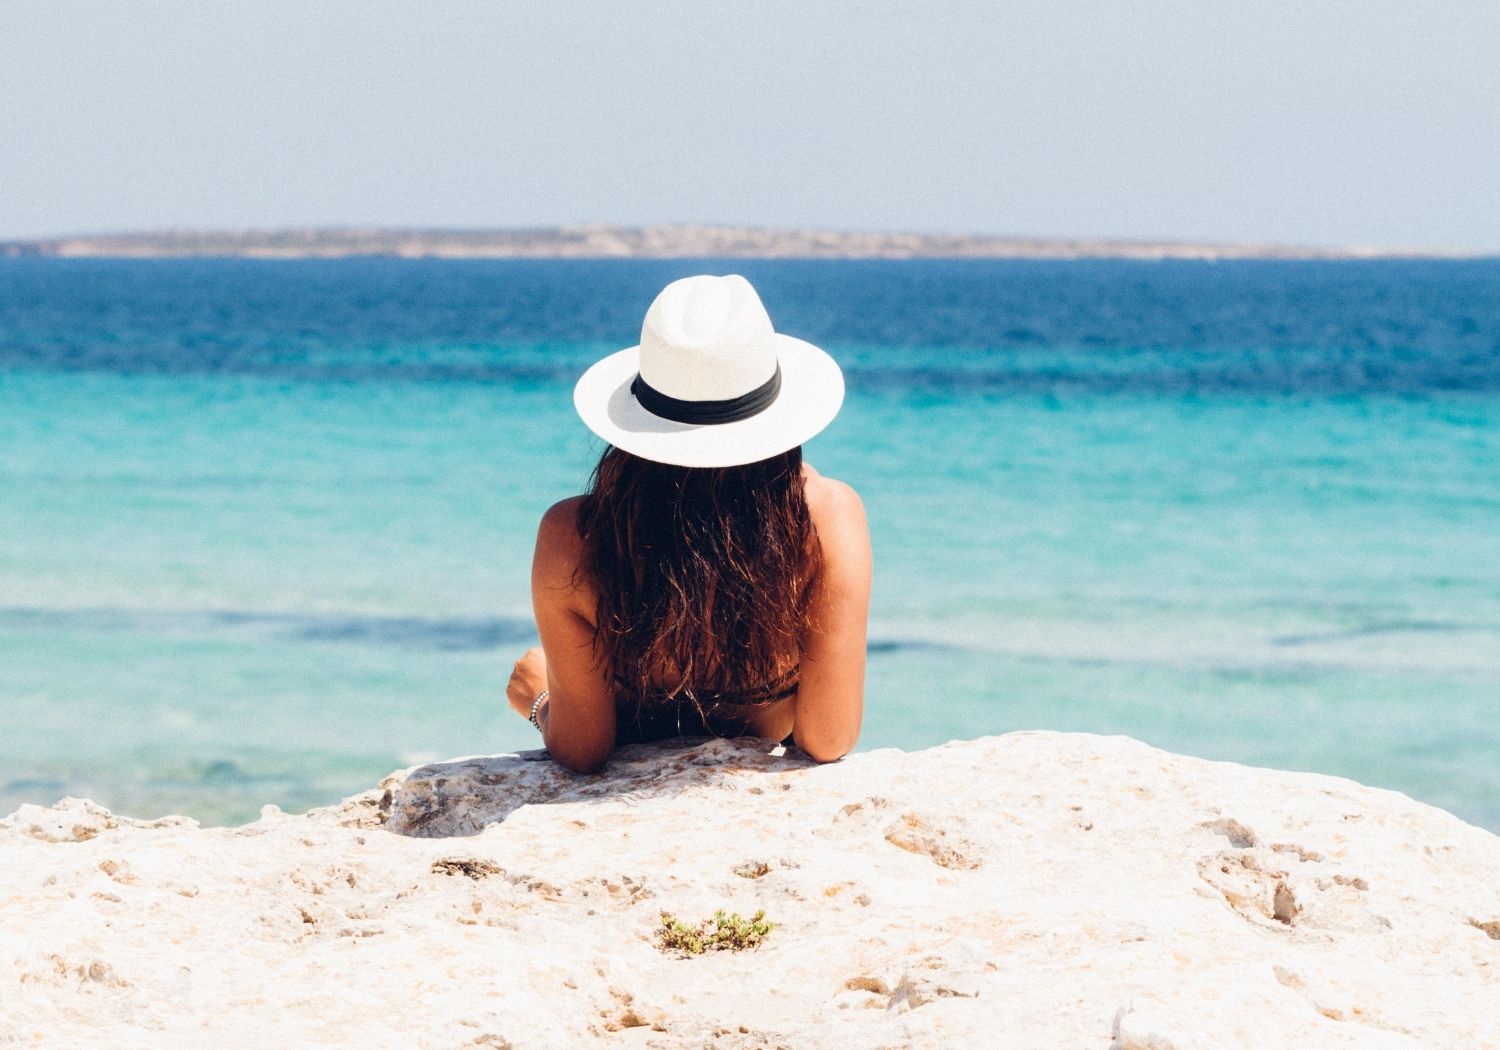 A woman wearing a hat alone at the beach